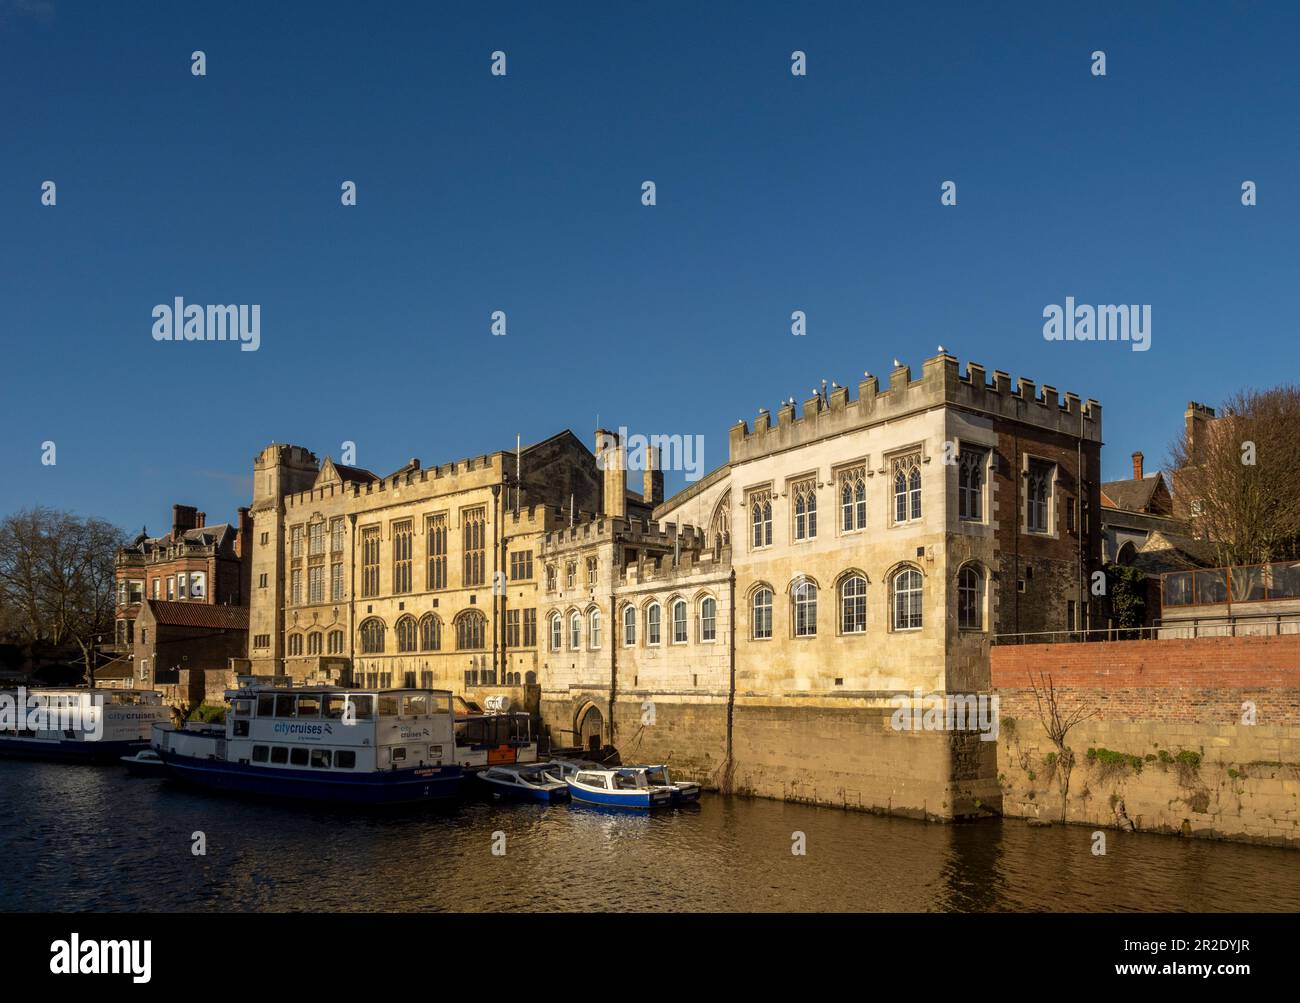 Moored tourist cruise boats on the river Ouse alongside the Guildhall. York. UK. Stock Photo